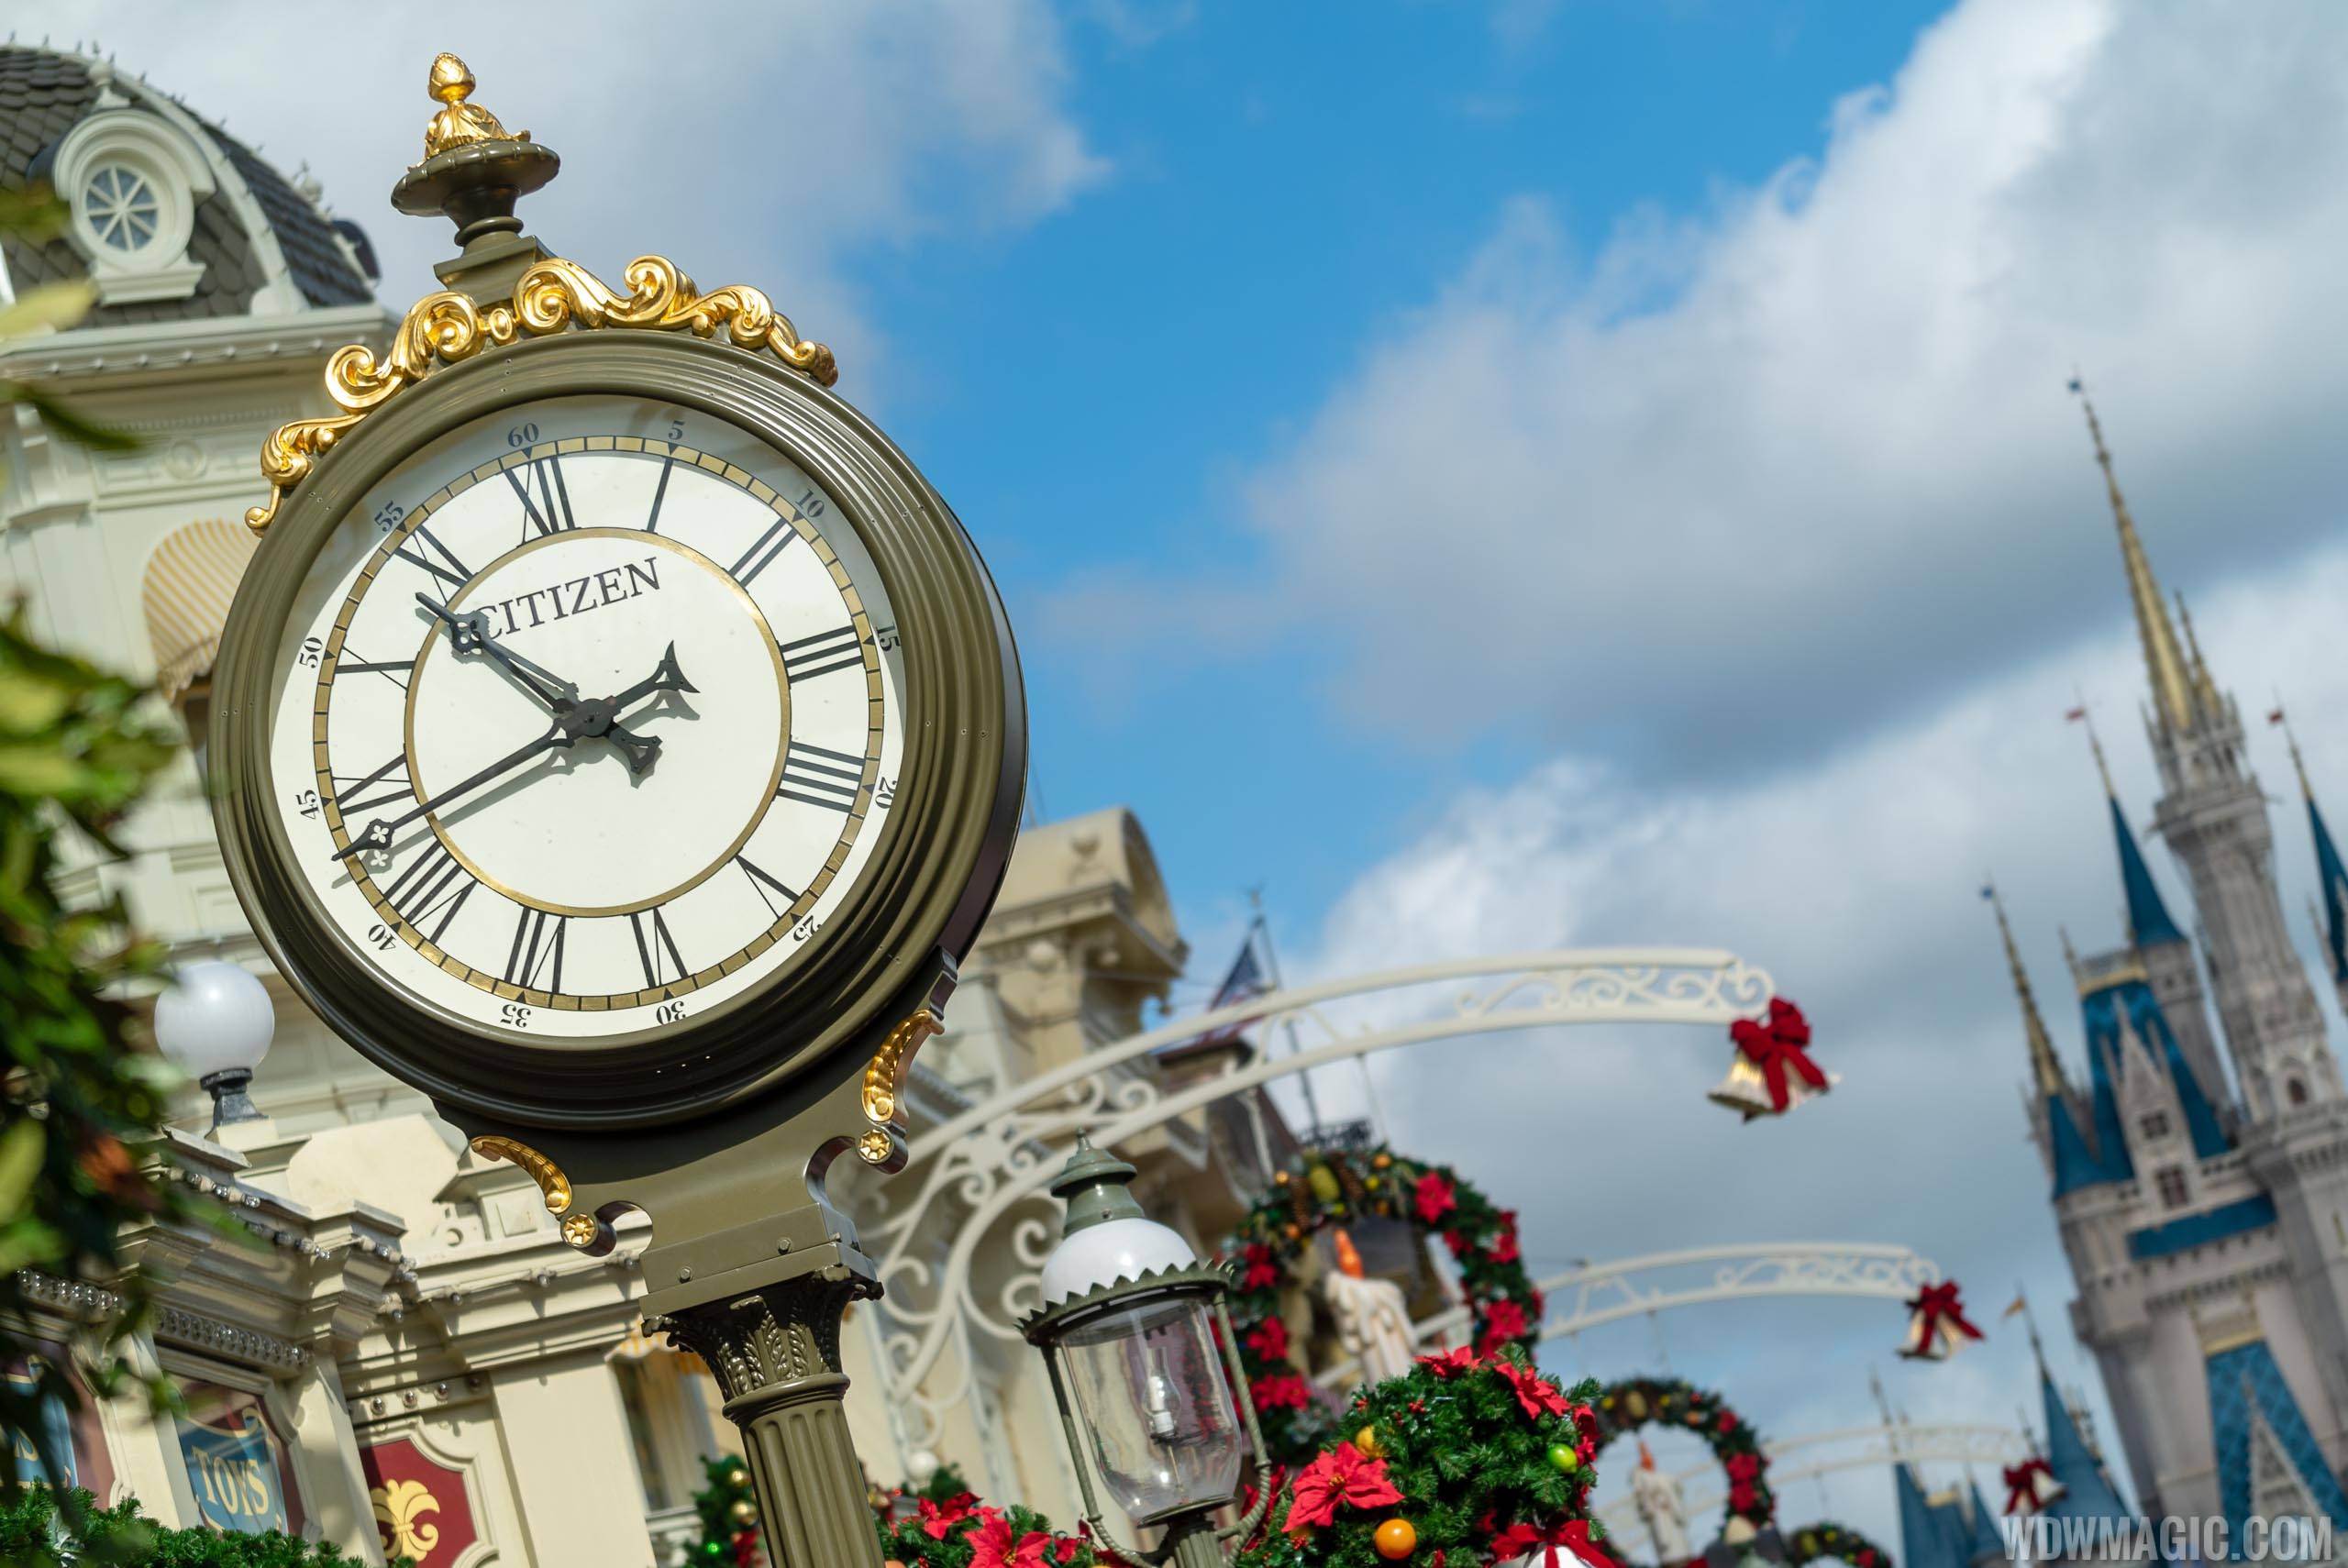 PHOTOS - Disney and Citizen unveil new Mickey timepieces and in-park clock branding at Walt Disney World